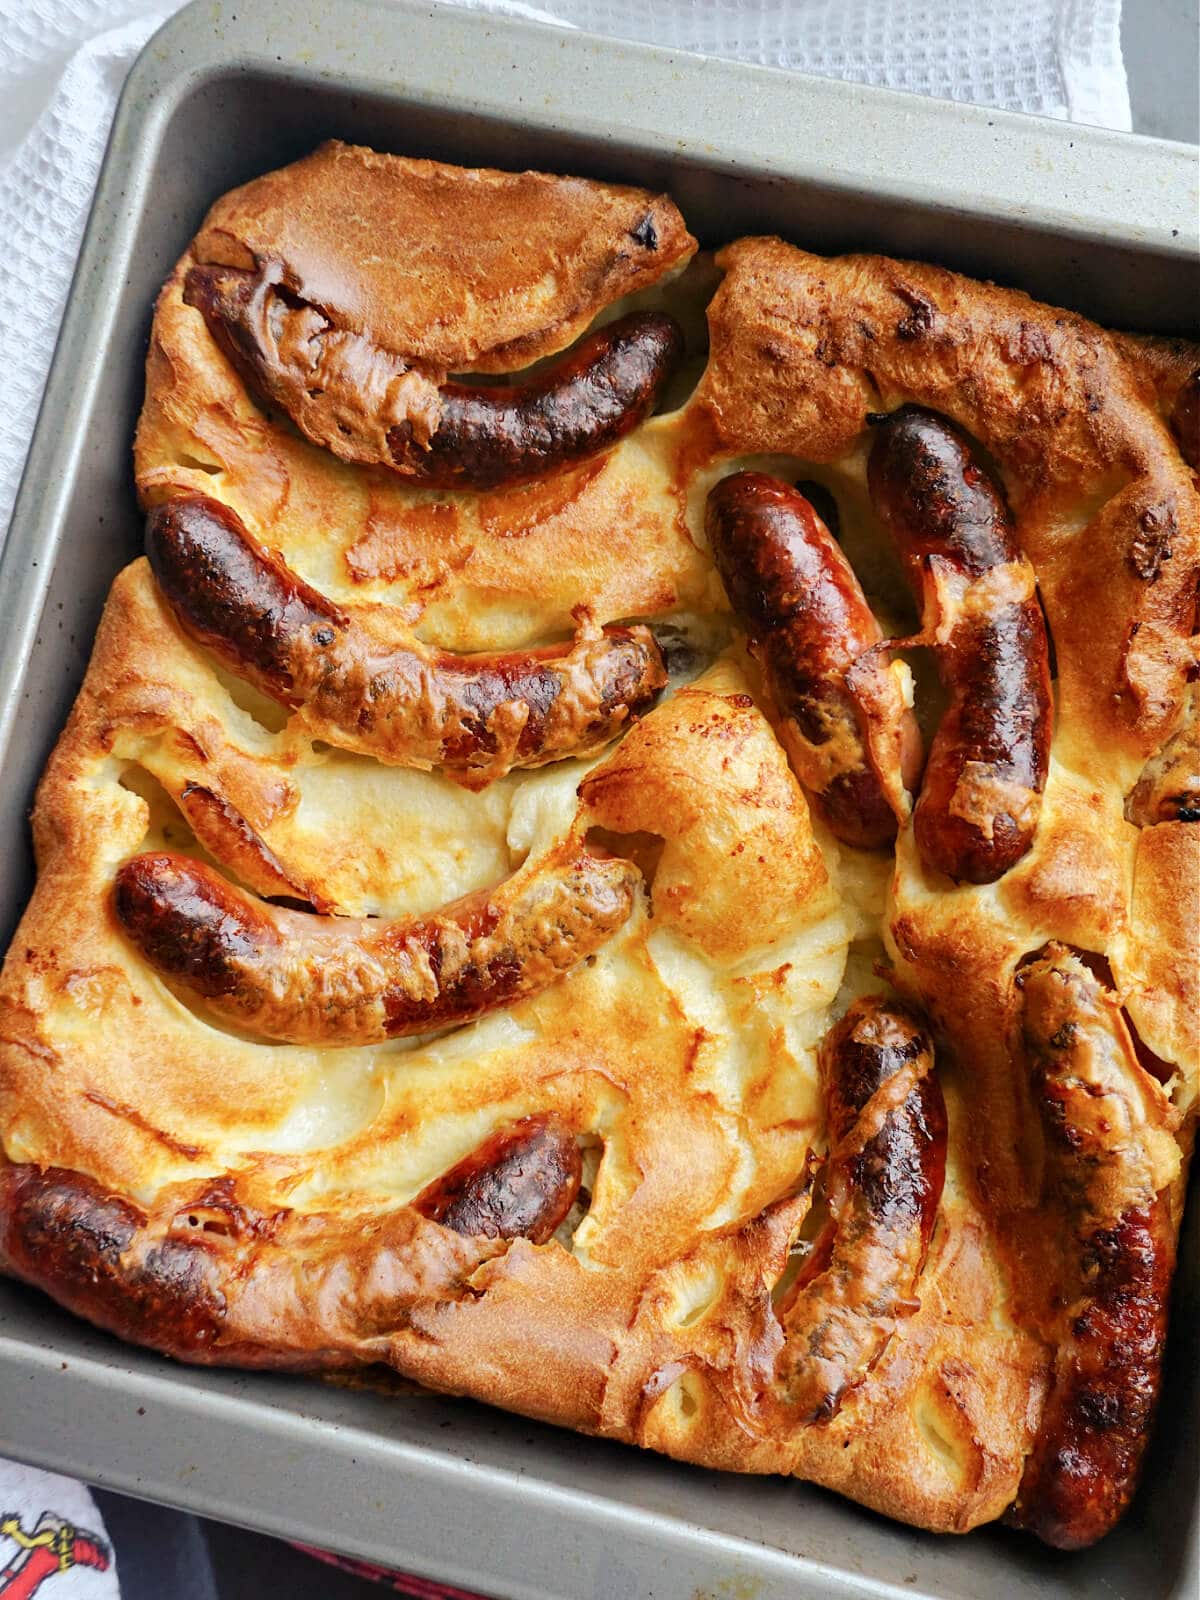 A toad in the whole in an oven tray